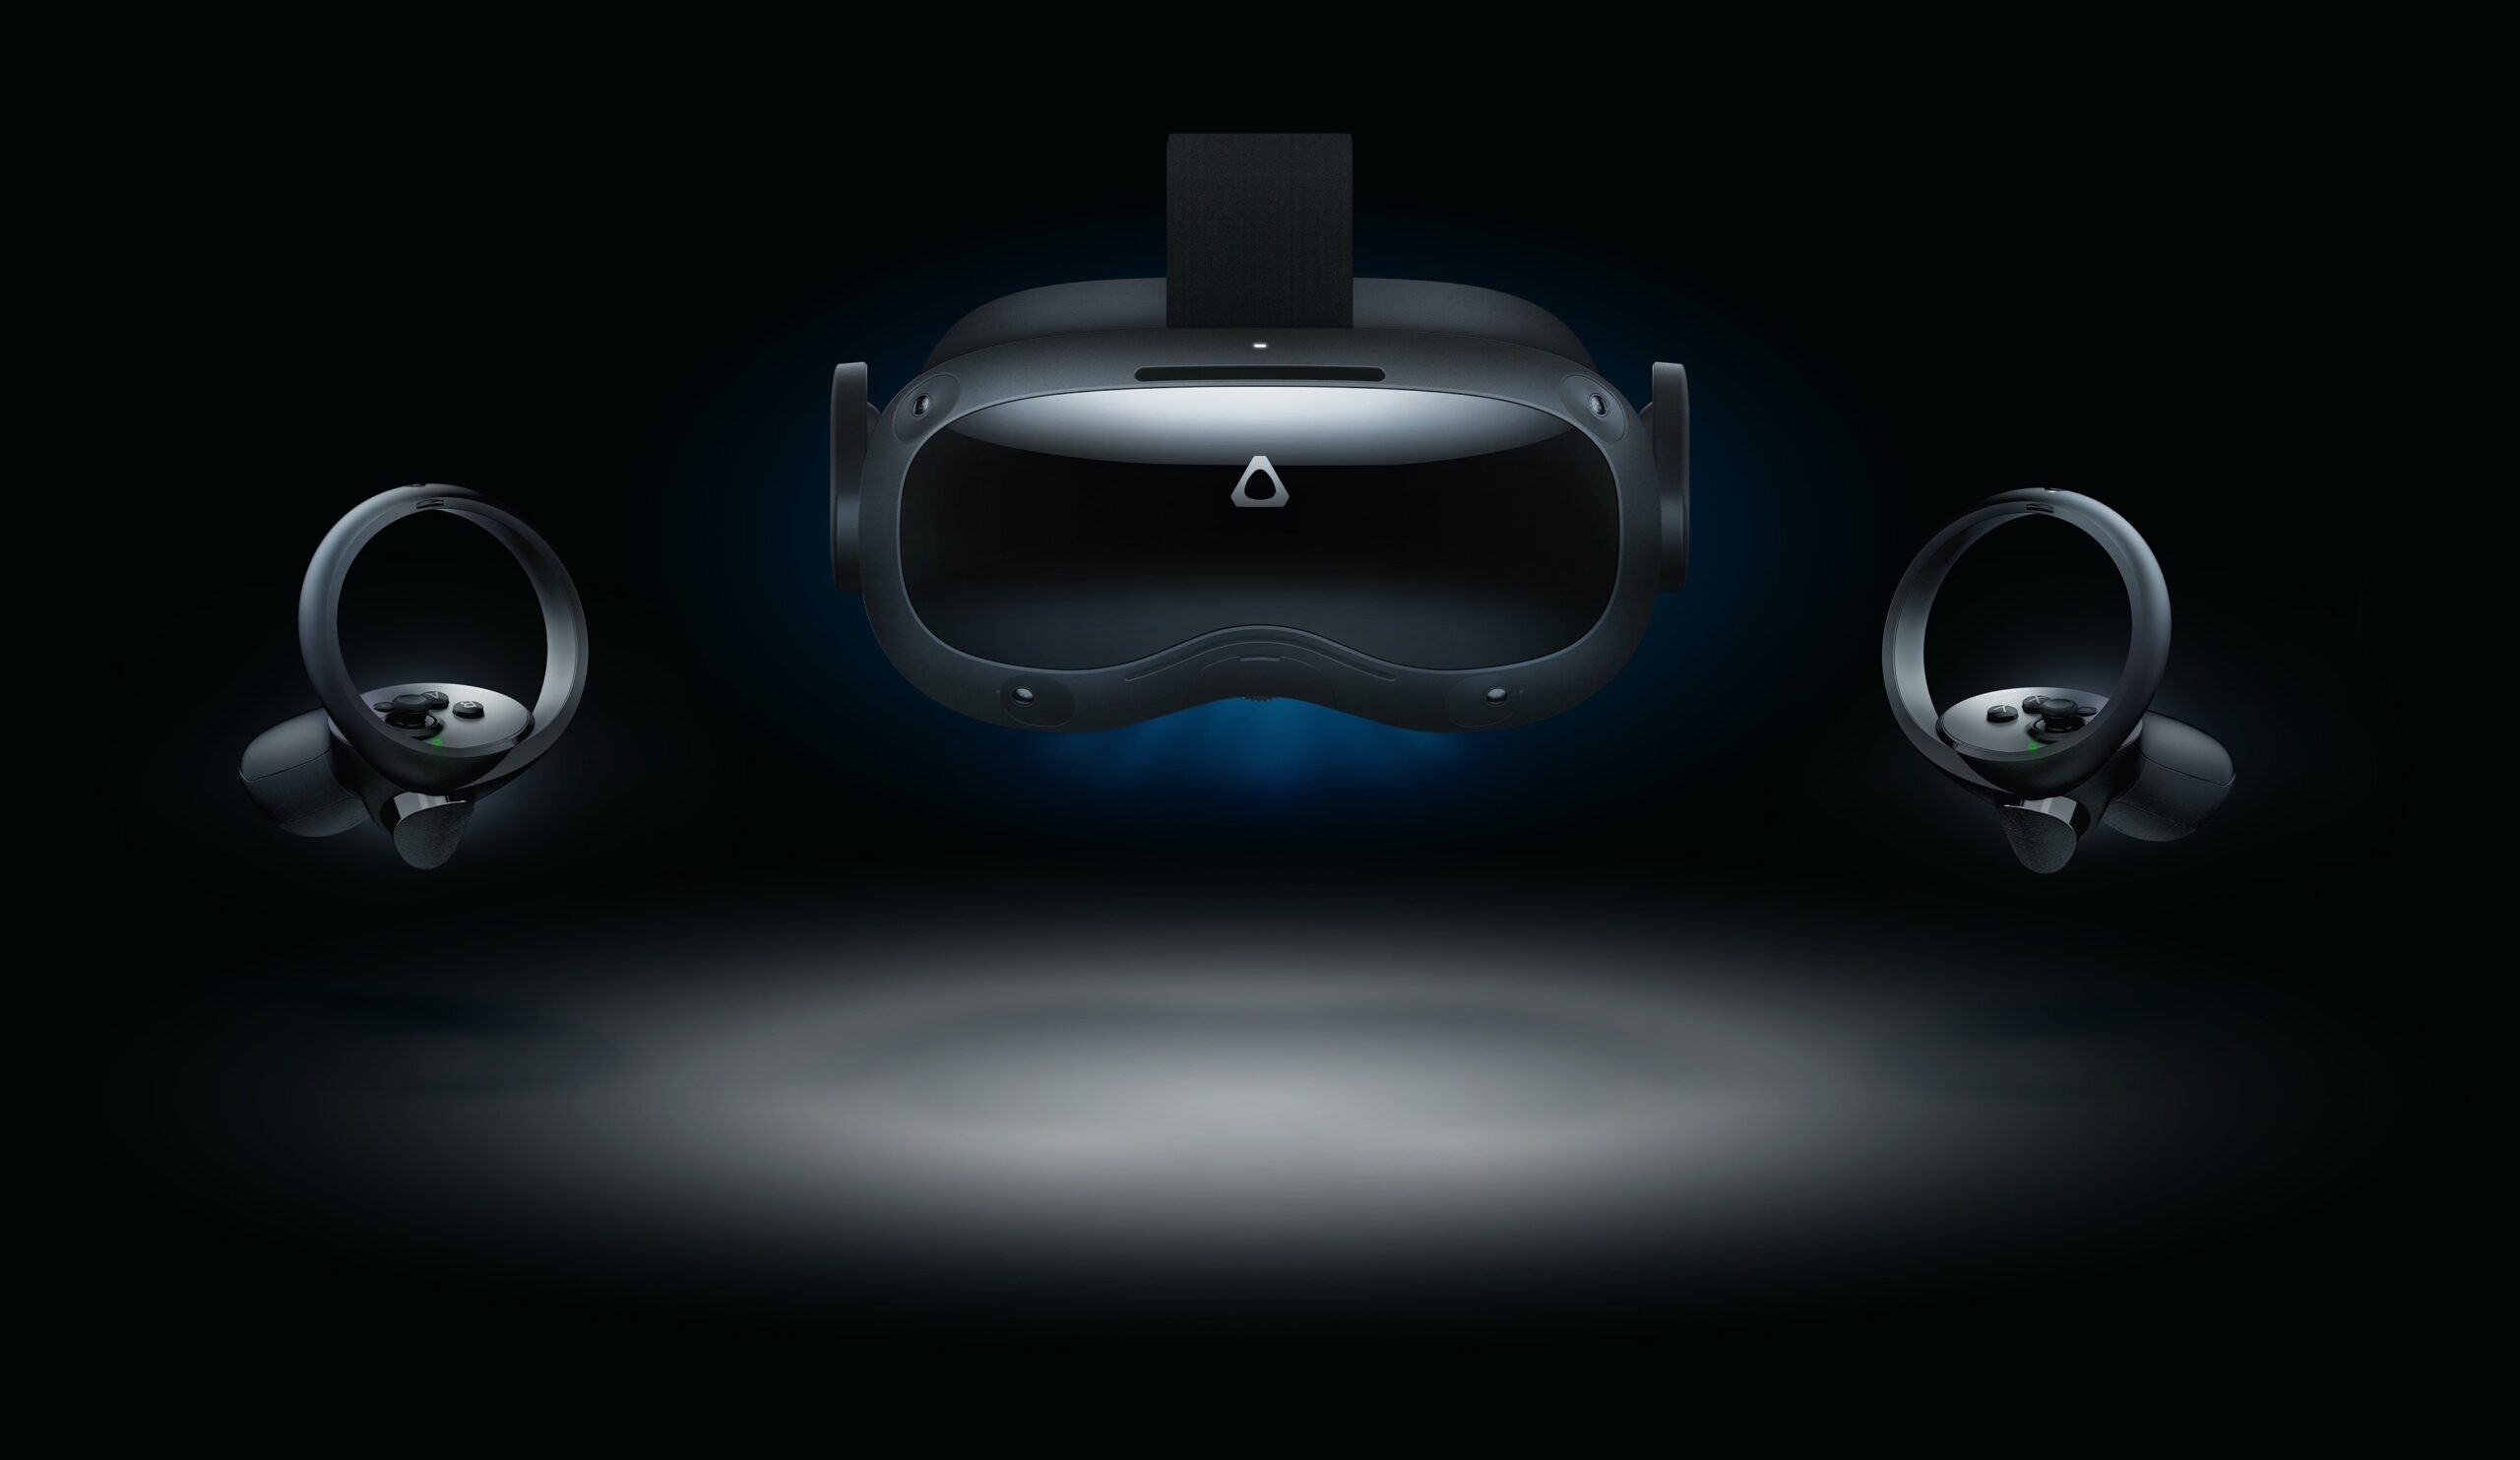 HTC launches two high resolution 5K VR headsets: Vive Pro 2 and Vive Focus 3 - Rumors